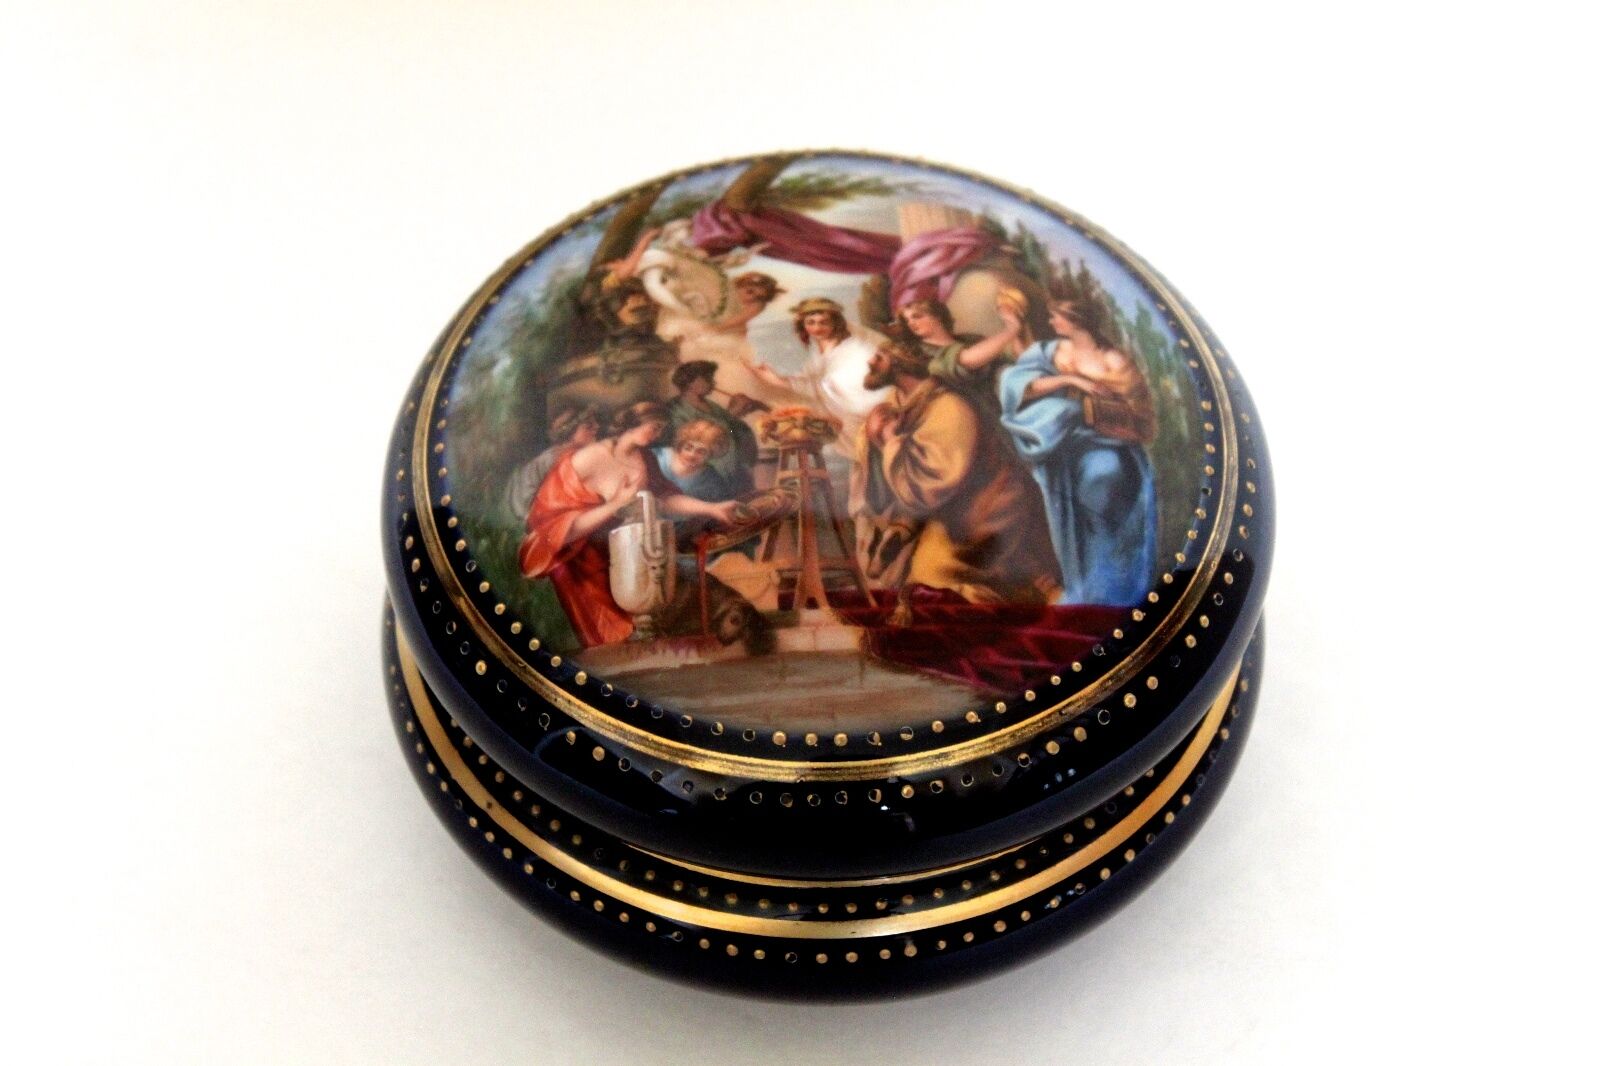 ANTIQUE HAND PAINTED KARLSBAD AUSTRIA LARGE SIZE COVERED TRINKET BOX